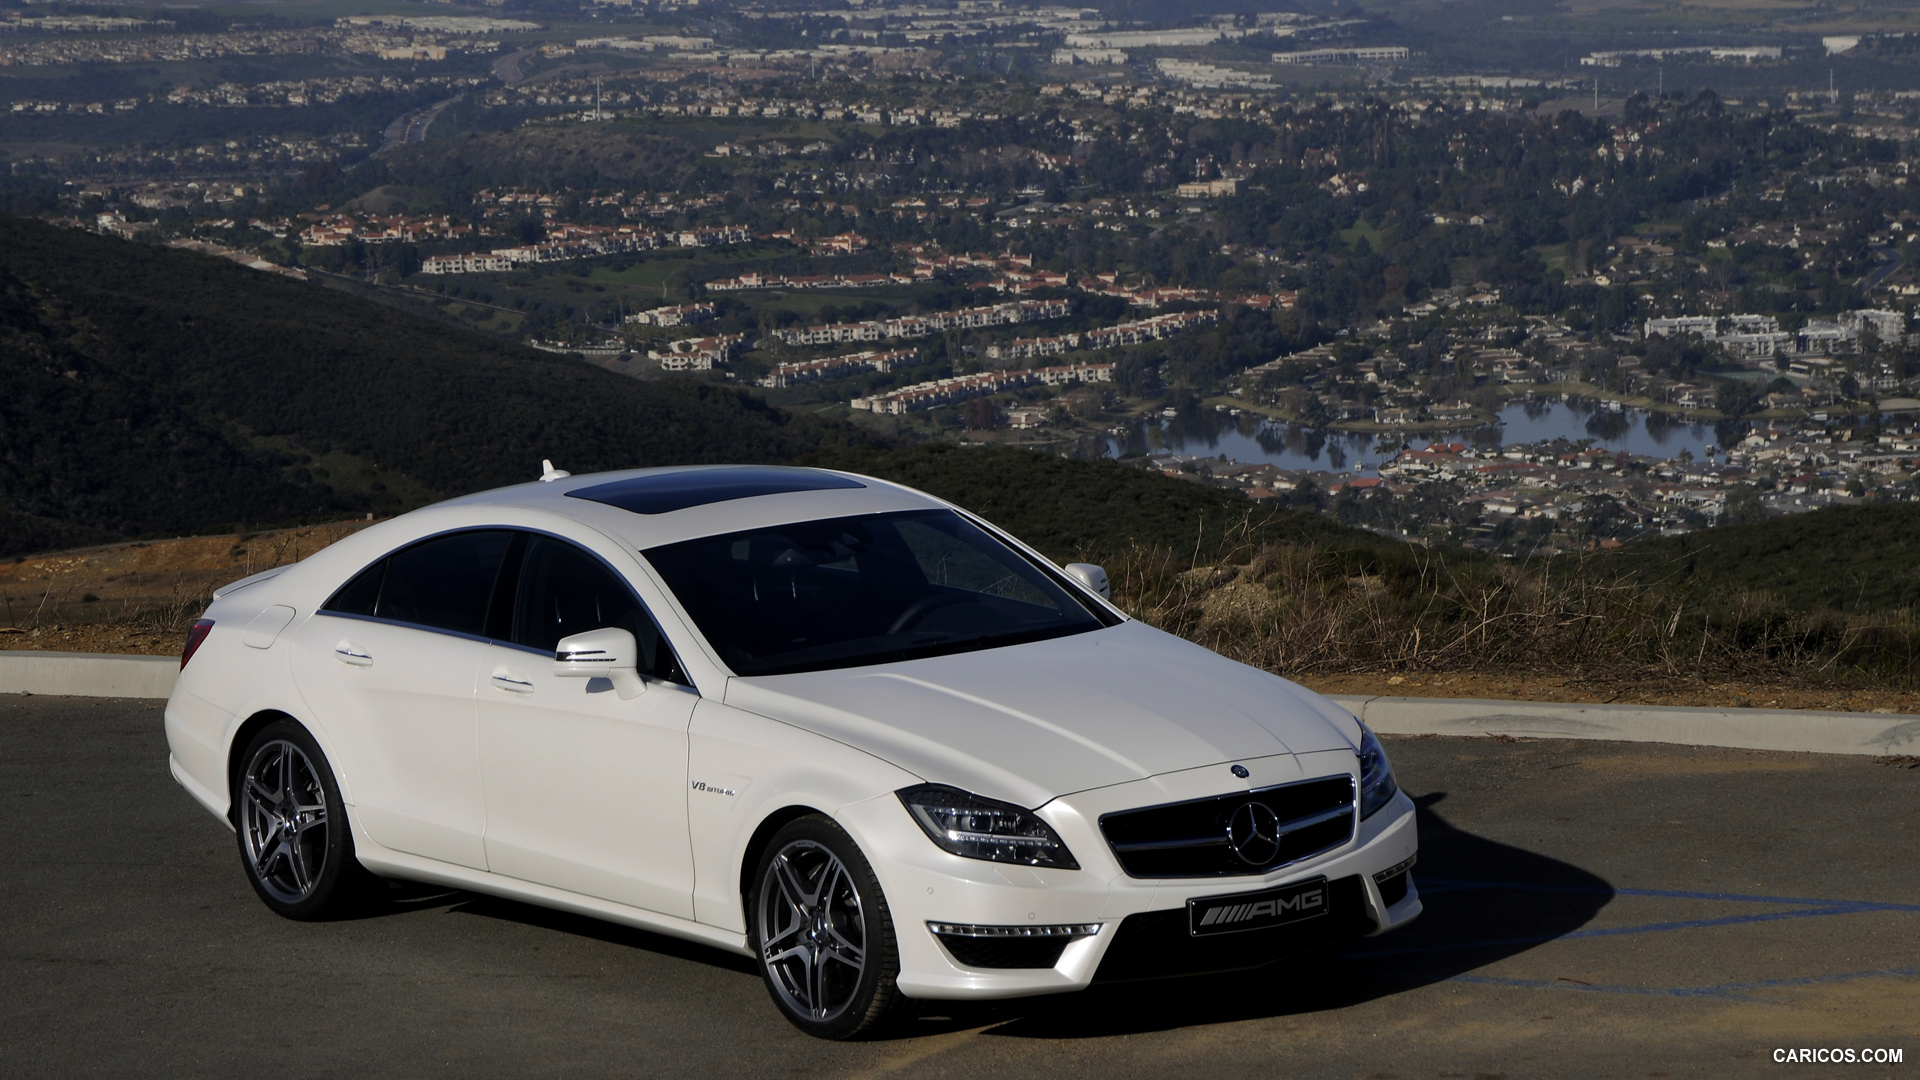 Mercedes-Benz CLS63 AMG (2012) US-Version - Diamond White - Side, #27 of 100